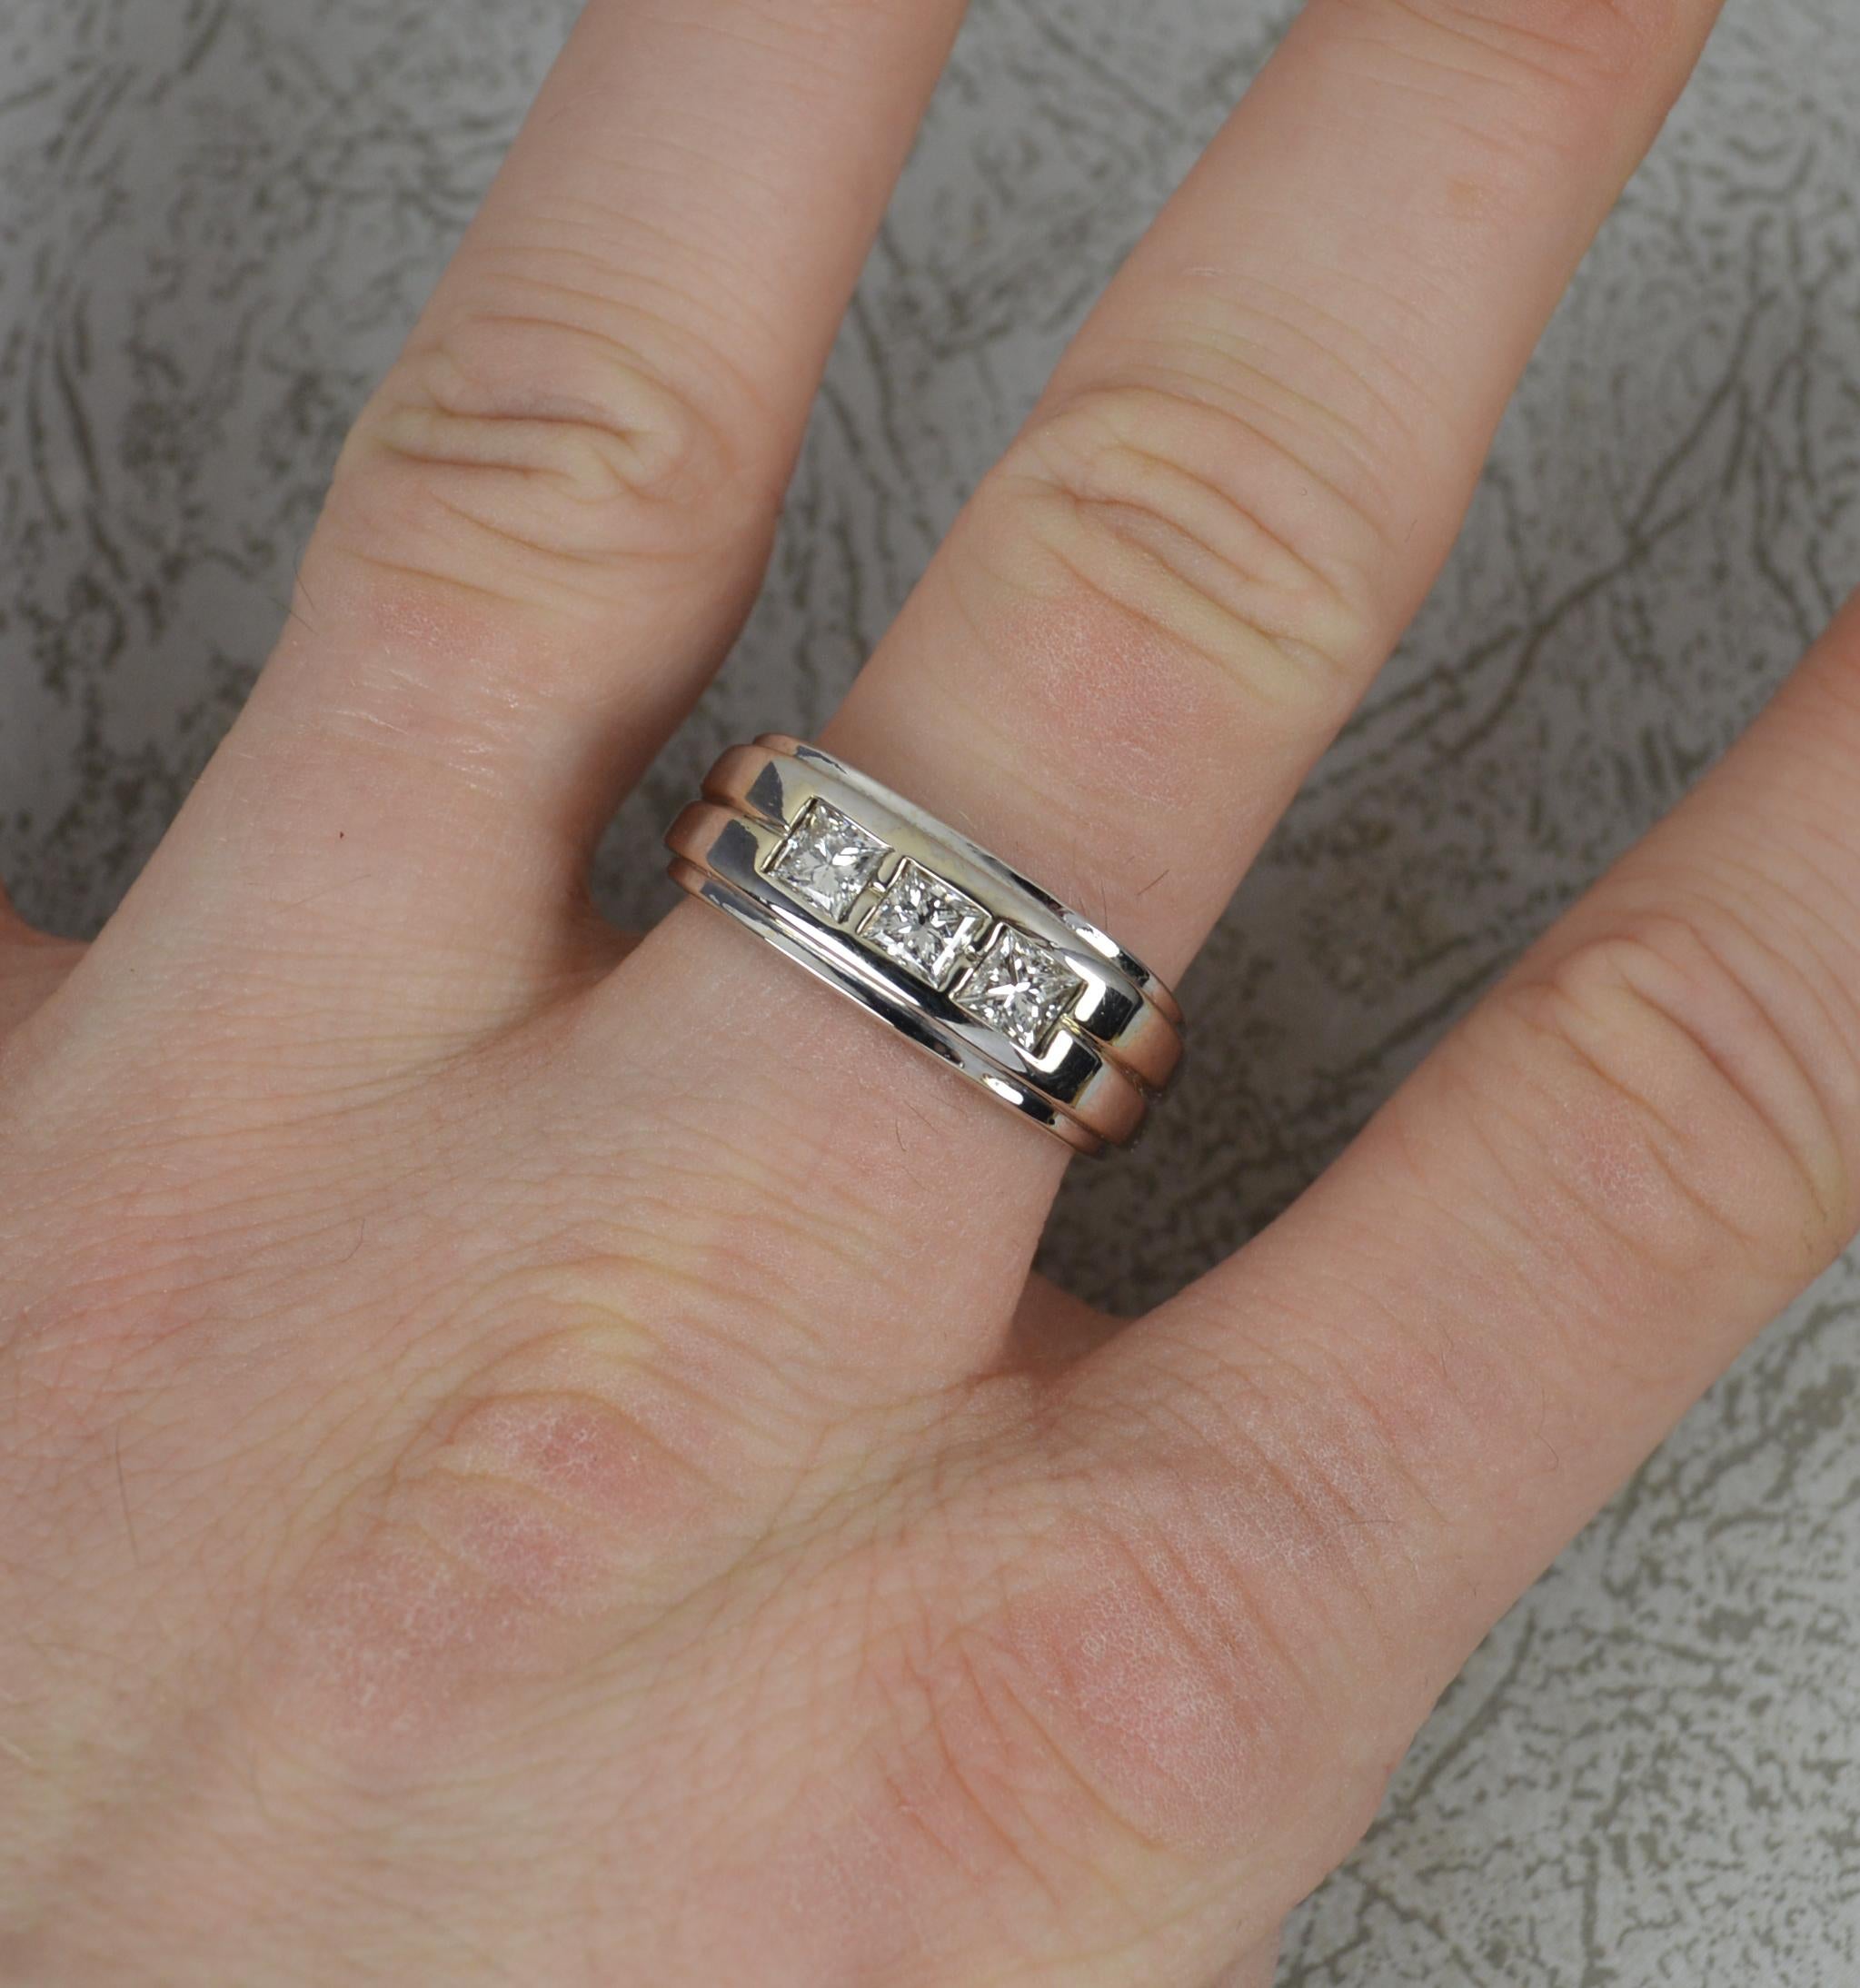 A superb quality natural diamond ring.
Solid 14 carat white gold example.
Designed with three natural, princess cut diamonds to total 0.9 carat as confirmed to shank.
3.75mm diameter diamonds, very clean bright and sparkly. 8.2mm wide